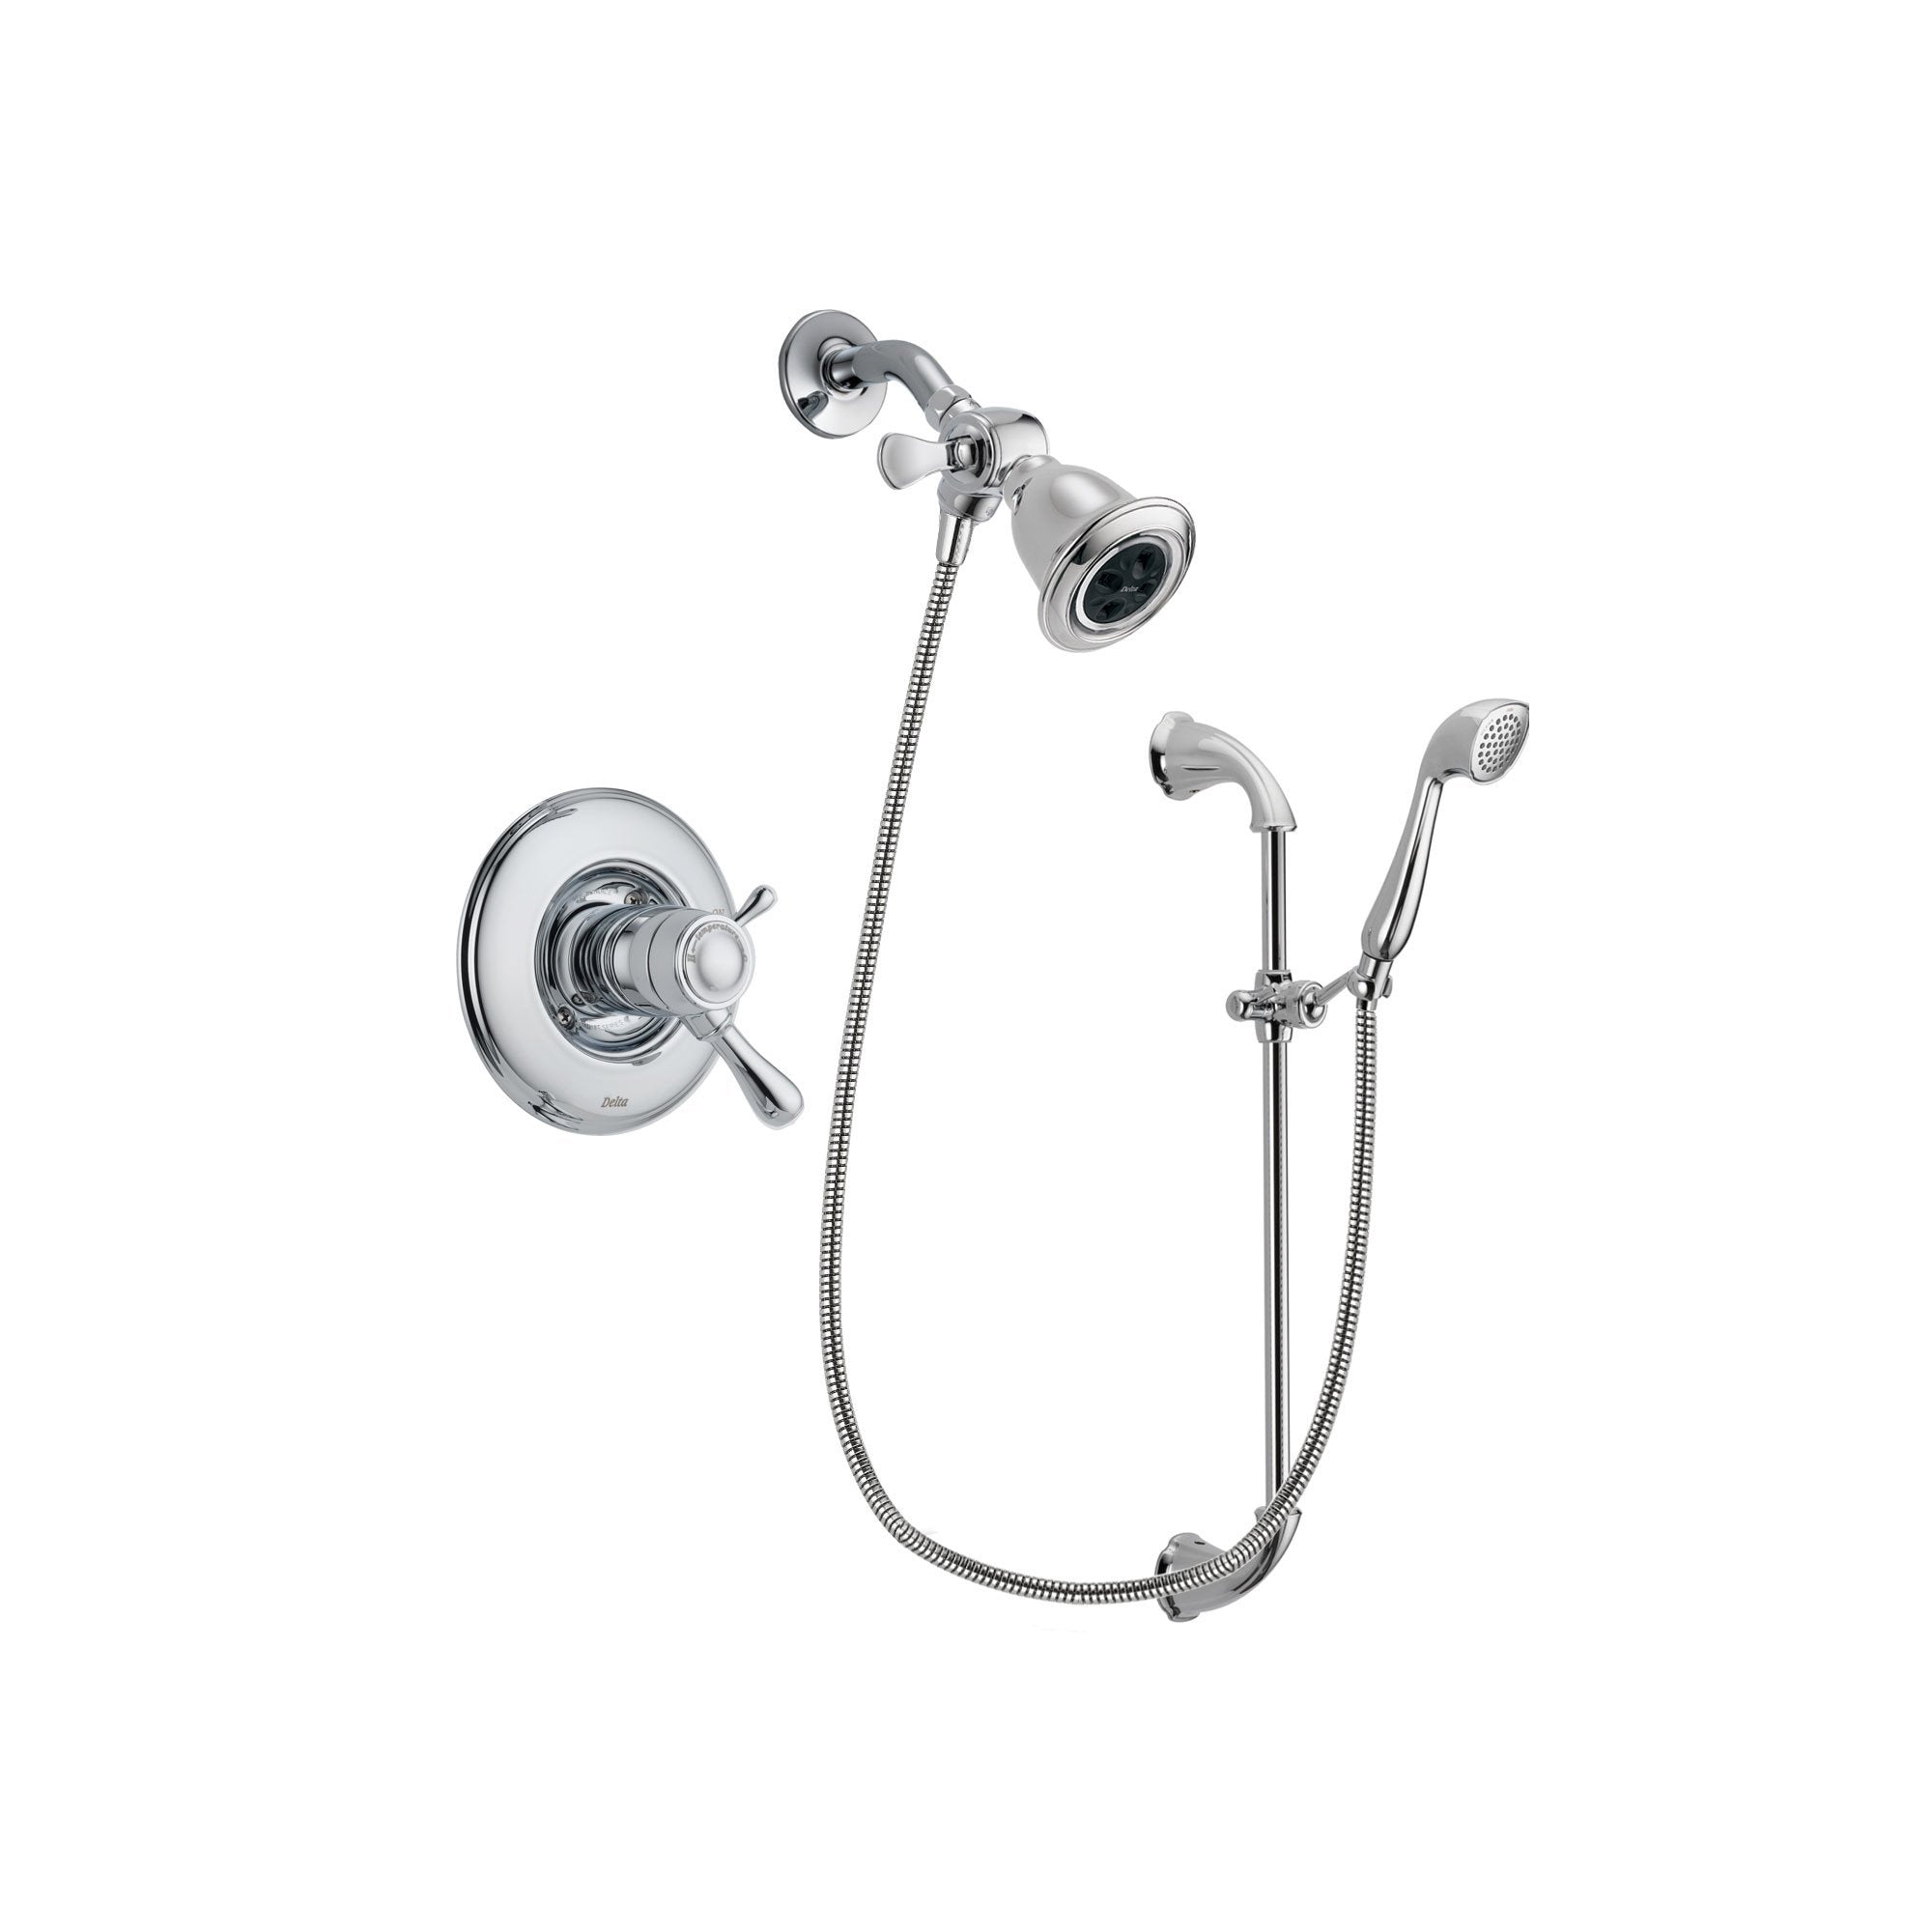 Delta Leland Chrome Finish Thermostatic Shower Faucet System Package with Water Efficient Showerhead and Handheld Shower with Slide Bar Includes Rough-in Valve DSP0872V